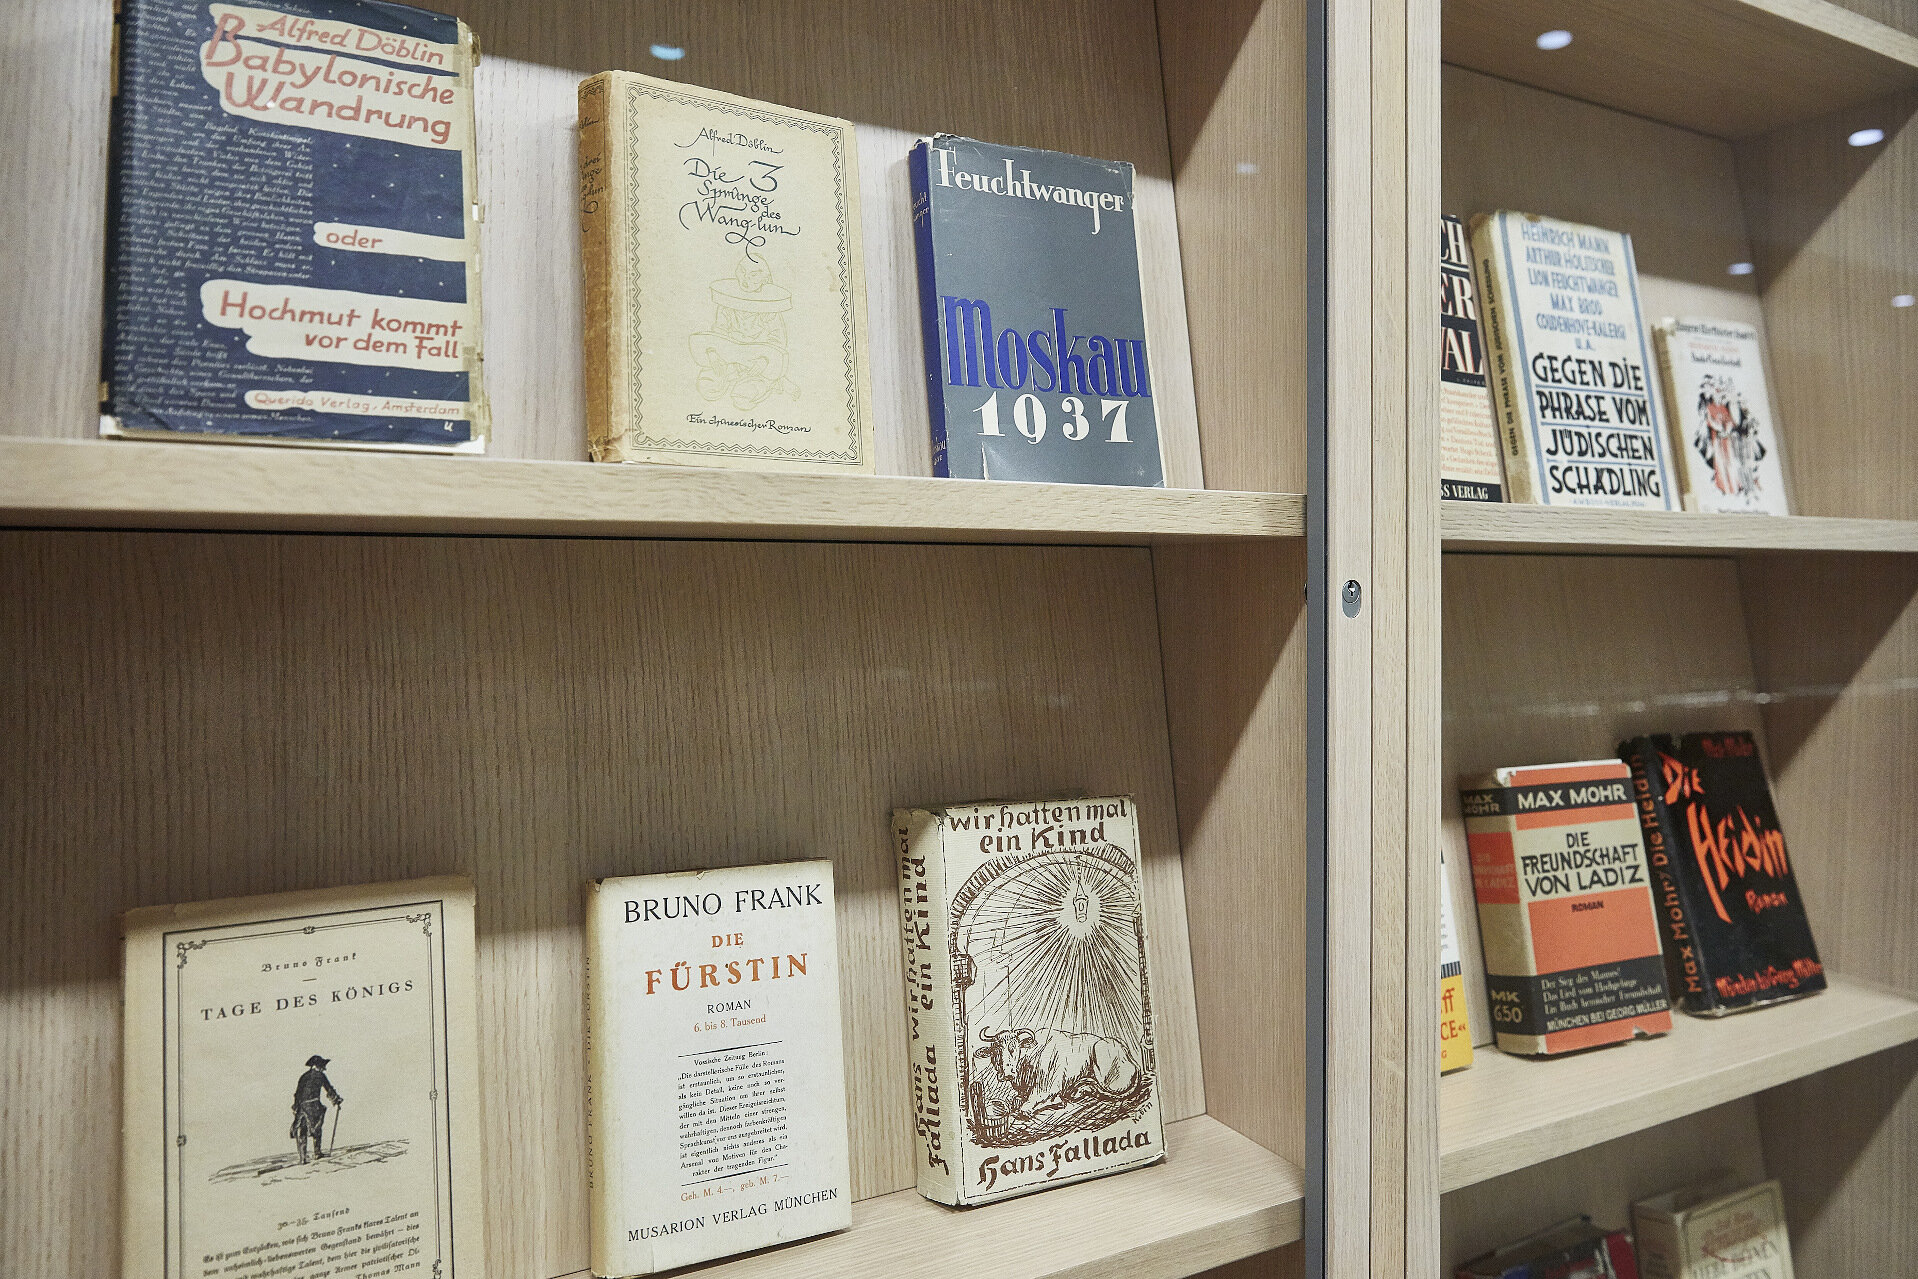 The covers of books by Lion Feuchtwanger, Alfred Döblin, Bruno Frank, Hans Fallada, Max Mohr, and others are shown in the display cases.